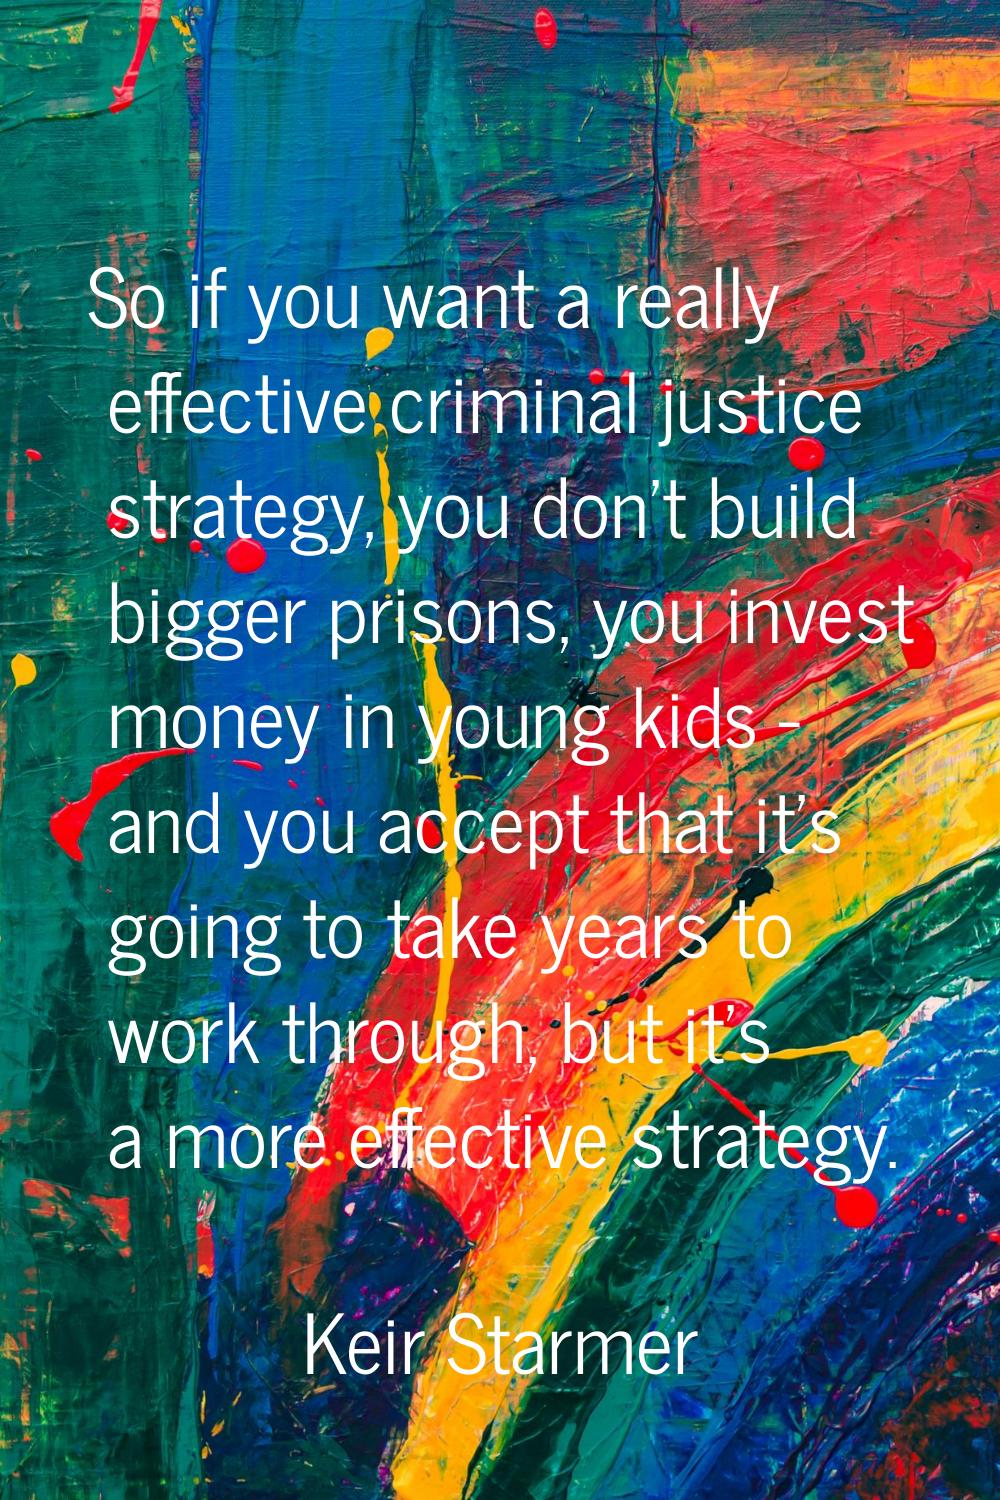 So if you want a really effective criminal justice strategy, you don't build bigger prisons, you in